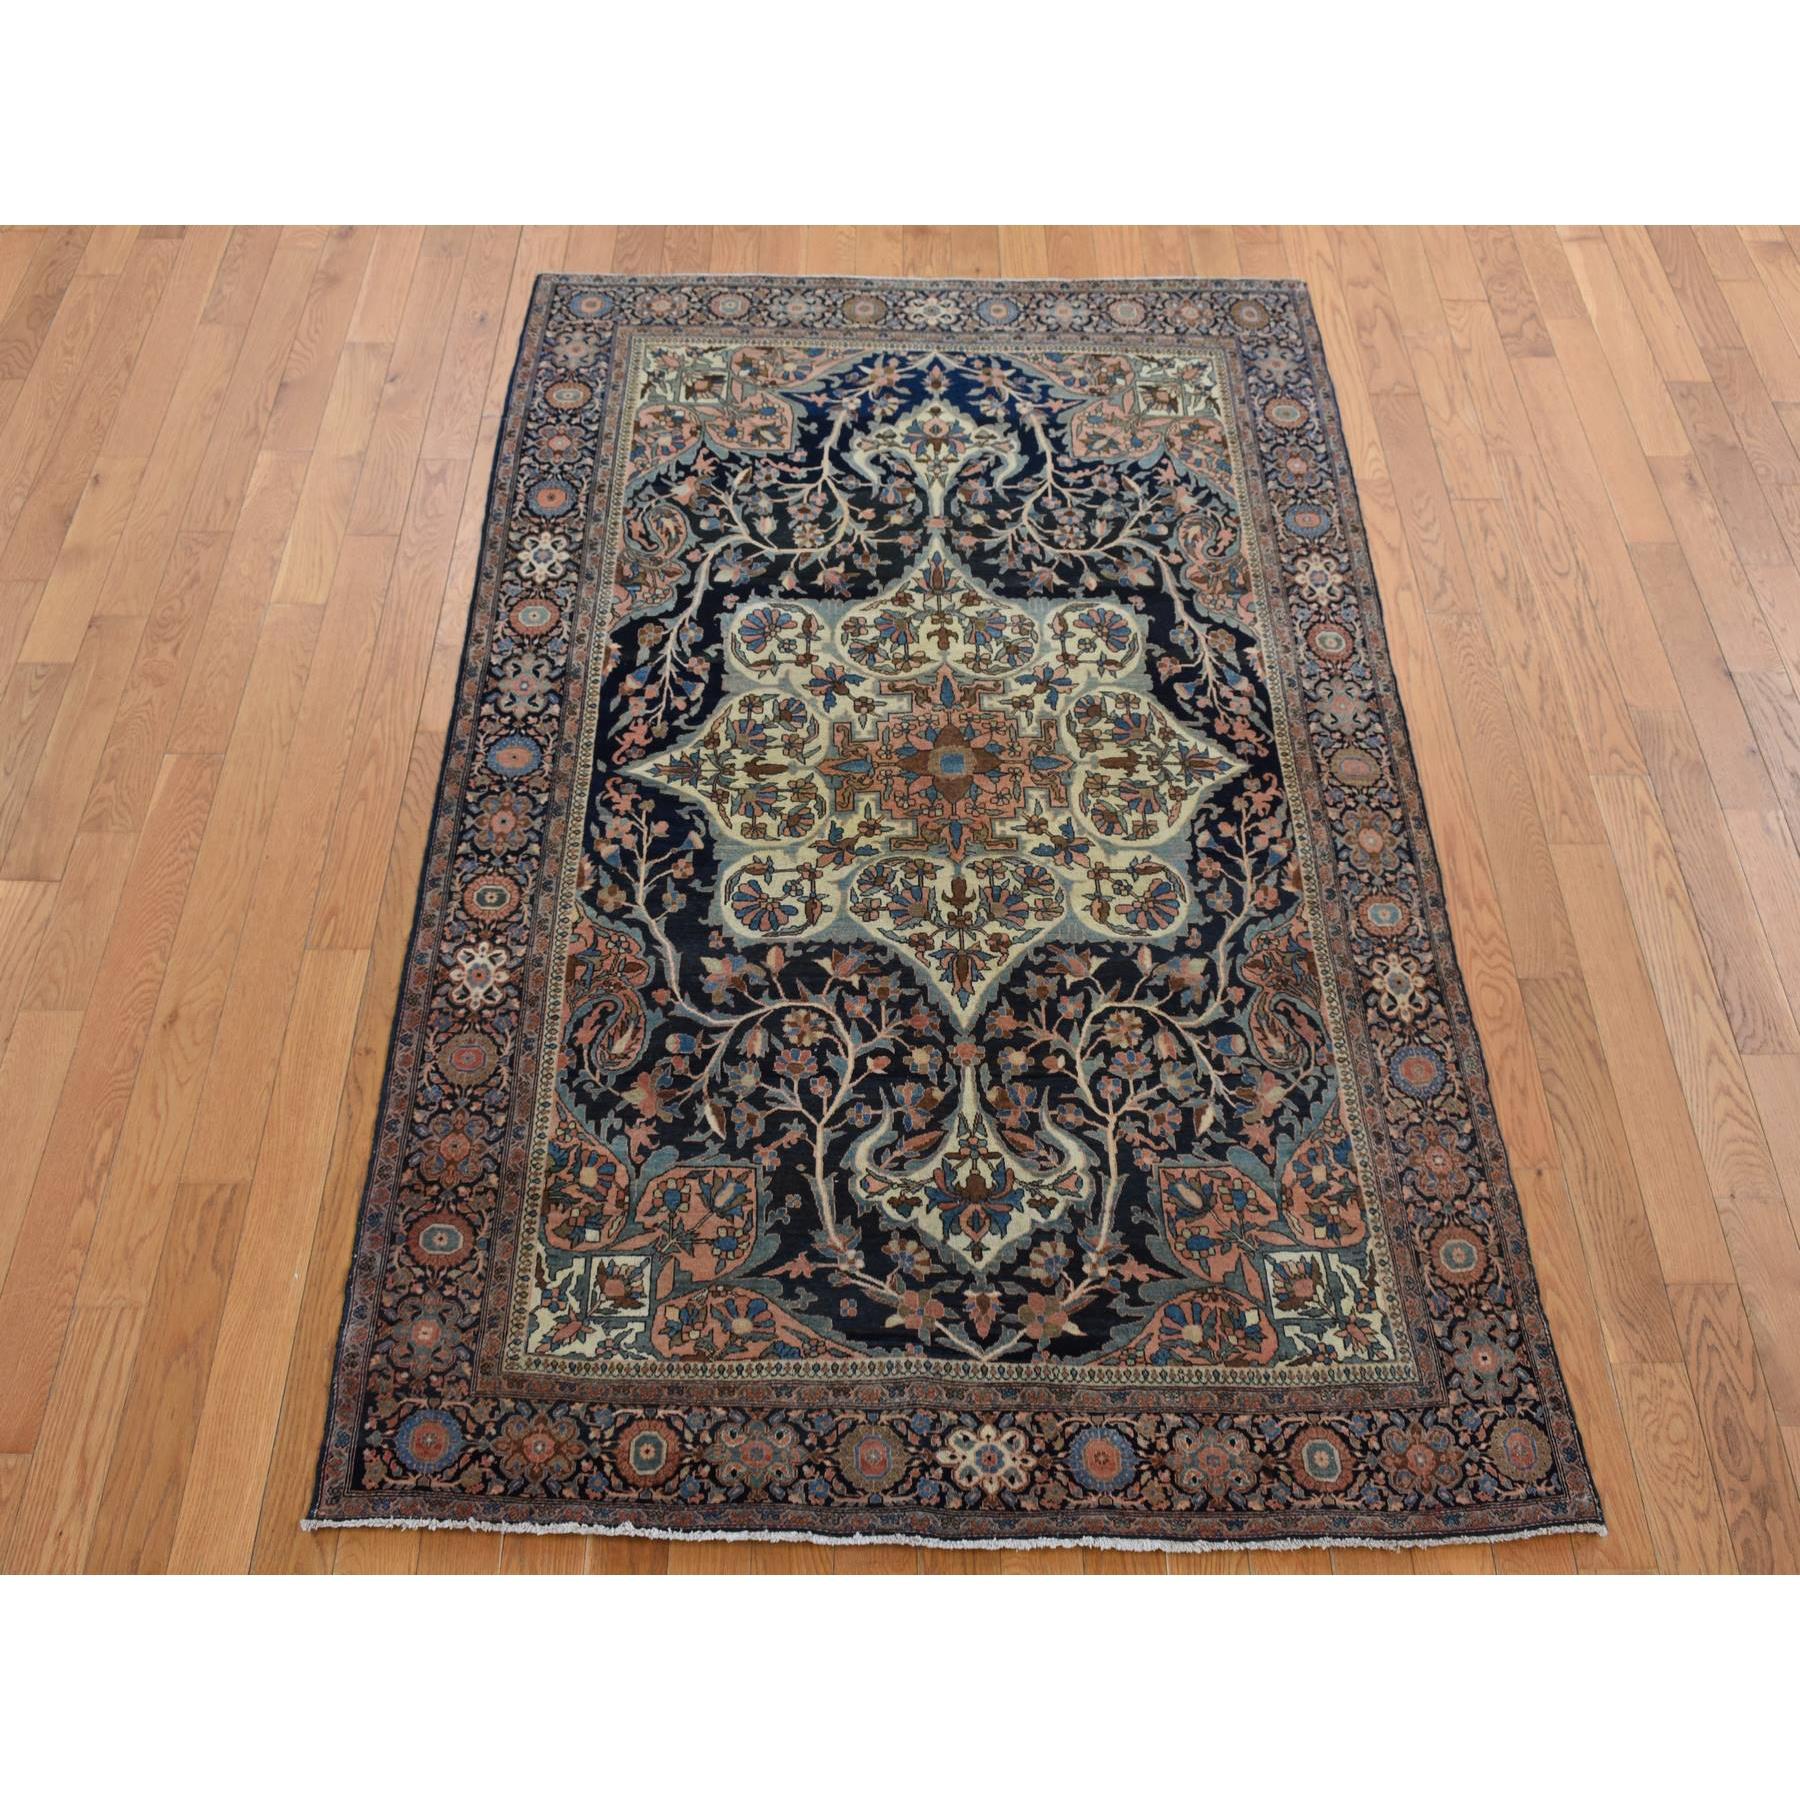 This fabulous Hand-Knotted carpet has been created and designed for extra strength and durability. This rug has been handcrafted for weeks in the traditional method that is used to make
Exact Rug Size in Feet and Inches : 4'4